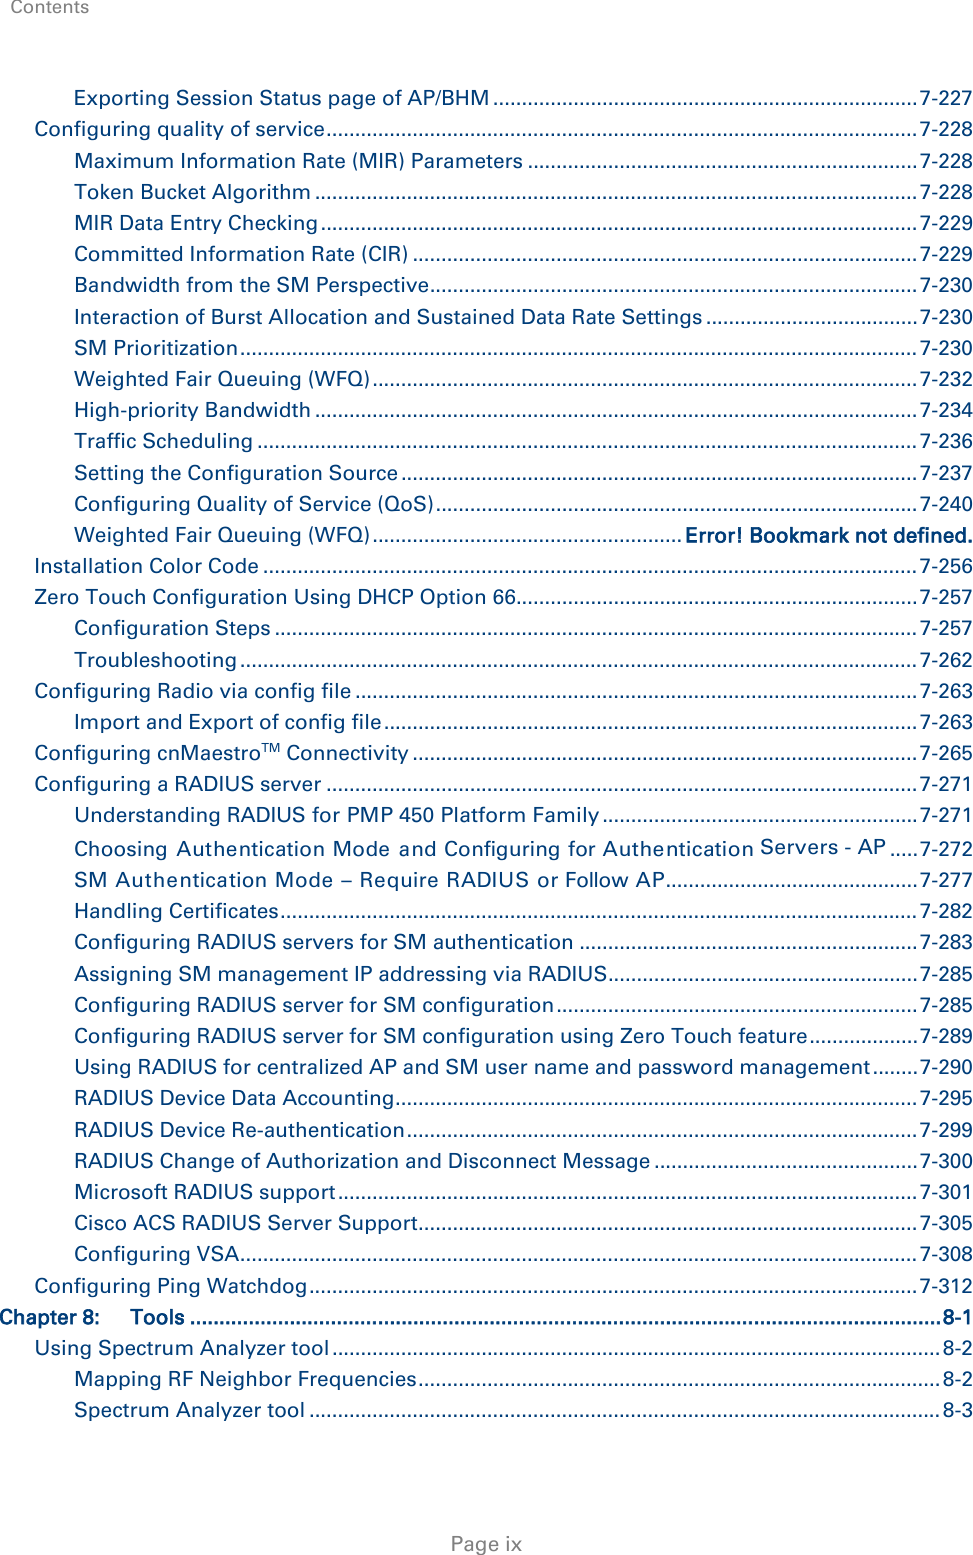 Contents     Page ix Exporting Session Status page of AP/BHM .......................................................................... 7-227 Configuring quality of service ....................................................................................................... 7-228 Maximum Information Rate (MIR) Parameters .................................................................... 7-228 Token Bucket Algorithm ......................................................................................................... 7-228 MIR Data Entry Checking ........................................................................................................ 7-229 Committed Information Rate (CIR) ........................................................................................ 7-229 Bandwidth from the SM Perspective ..................................................................................... 7-230 Interaction of Burst Allocation and Sustained Data Rate Settings ..................................... 7-230 SM Prioritization ...................................................................................................................... 7-230 Weighted Fair Queuing (WFQ) ............................................................................................... 7-232 High-priority Bandwidth ......................................................................................................... 7-234 Traffic Scheduling ................................................................................................................... 7-236 Setting the Configuration Source .......................................................................................... 7-237 Configuring Quality of Service (QoS) .................................................................................... 7-240 Weighted Fair Queuing (WFQ) ...................................................... Error! Bookmark not defined. Installation Color Code .................................................................................................................. 7-256 Zero Touch Configuration Using DHCP Option 66 ...................................................................... 7-257 Configuration Steps ................................................................................................................ 7-257 Troubleshooting ...................................................................................................................... 7-262 Configuring Radio via config file .................................................................................................. 7-263 Import and Export of config file ............................................................................................. 7-263 Configuring cnMaestroTM Connectivity ........................................................................................ 7-265 Configuring a RADIUS server ....................................................................................................... 7-271 Understanding RADIUS for PMP 450 Platform Family ....................................................... 7-271 Choosing Authentication Mode  and Configuring for Authentication Servers - AP ..... 7-272 SM Authentication Mode – Require RADIUS or Follow AP ............................................ 7-277 Handling Certificates ............................................................................................................... 7-282 Configuring RADIUS servers for SM authentication ........................................................... 7-283 Assigning SM management IP addressing via RADIUS ...................................................... 7-285 Configuring RADIUS server for SM configuration ............................................................... 7-285 Configuring RADIUS server for SM configuration using Zero Touch feature ................... 7-289 Using RADIUS for centralized AP and SM user name and password management ........ 7-290 RADIUS Device Data Accounting ........................................................................................... 7-295 RADIUS Device Re-authentication ......................................................................................... 7-299 RADIUS Change of Authorization and Disconnect Message .............................................. 7-300 Microsoft RADIUS support ..................................................................................................... 7-301 Cisco ACS RADIUS Server Support ....................................................................................... 7-305 Configuring VSA ...................................................................................................................... 7-308 Configuring Ping Watchdog .......................................................................................................... 7-312 Chapter 8: Tools ................................................................................................................................ 8-1 Using Spectrum Analyzer tool .......................................................................................................... 8-2 Mapping RF Neighbor Frequencies ........................................................................................... 8-2 Spectrum Analyzer tool .............................................................................................................. 8-3 